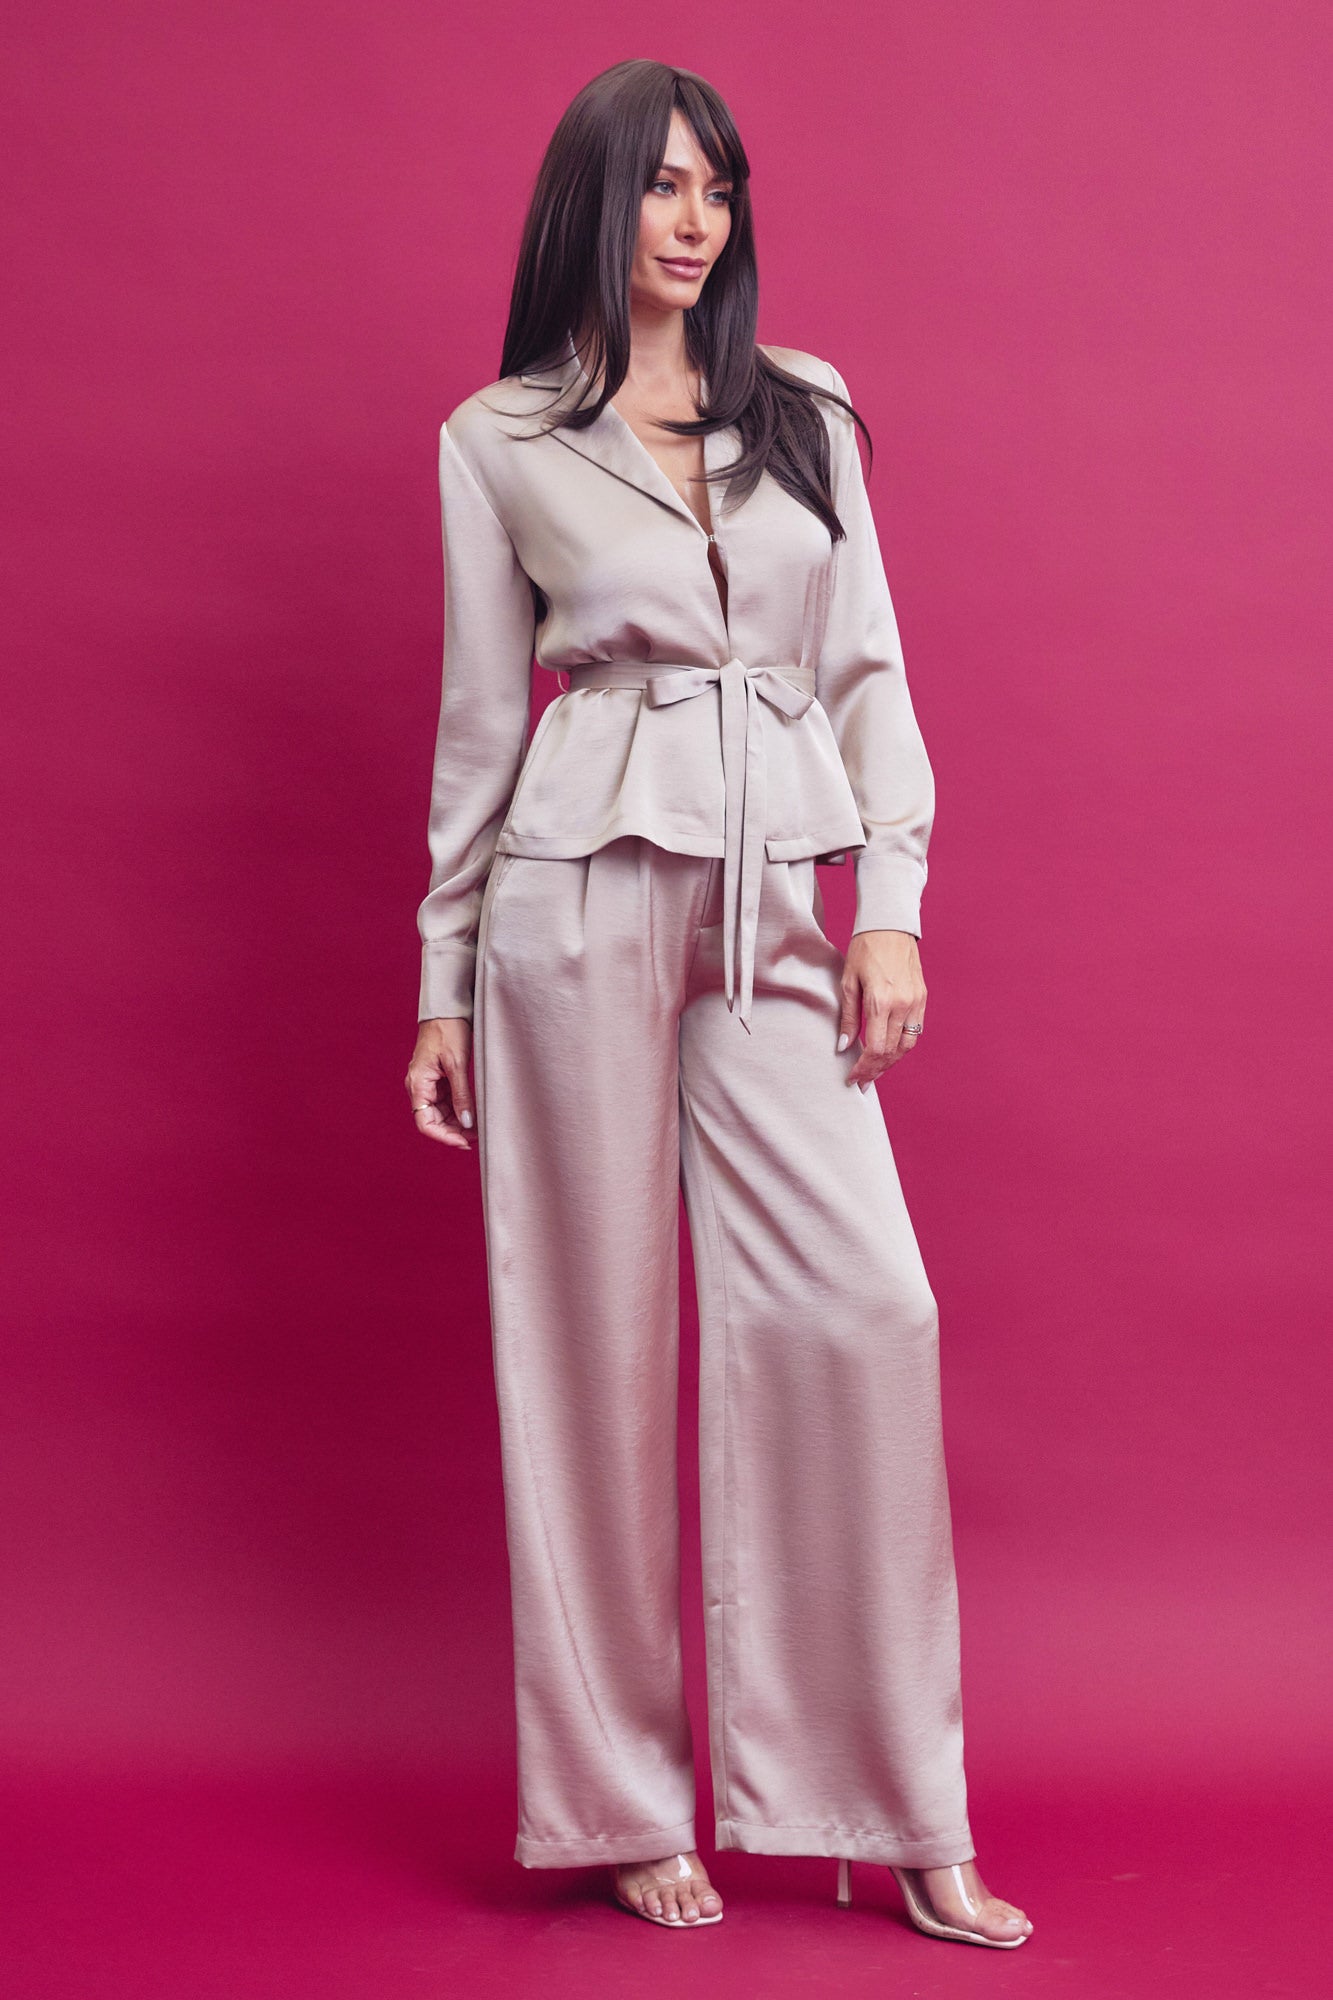 Woven Blouse With Tie and Pants Set